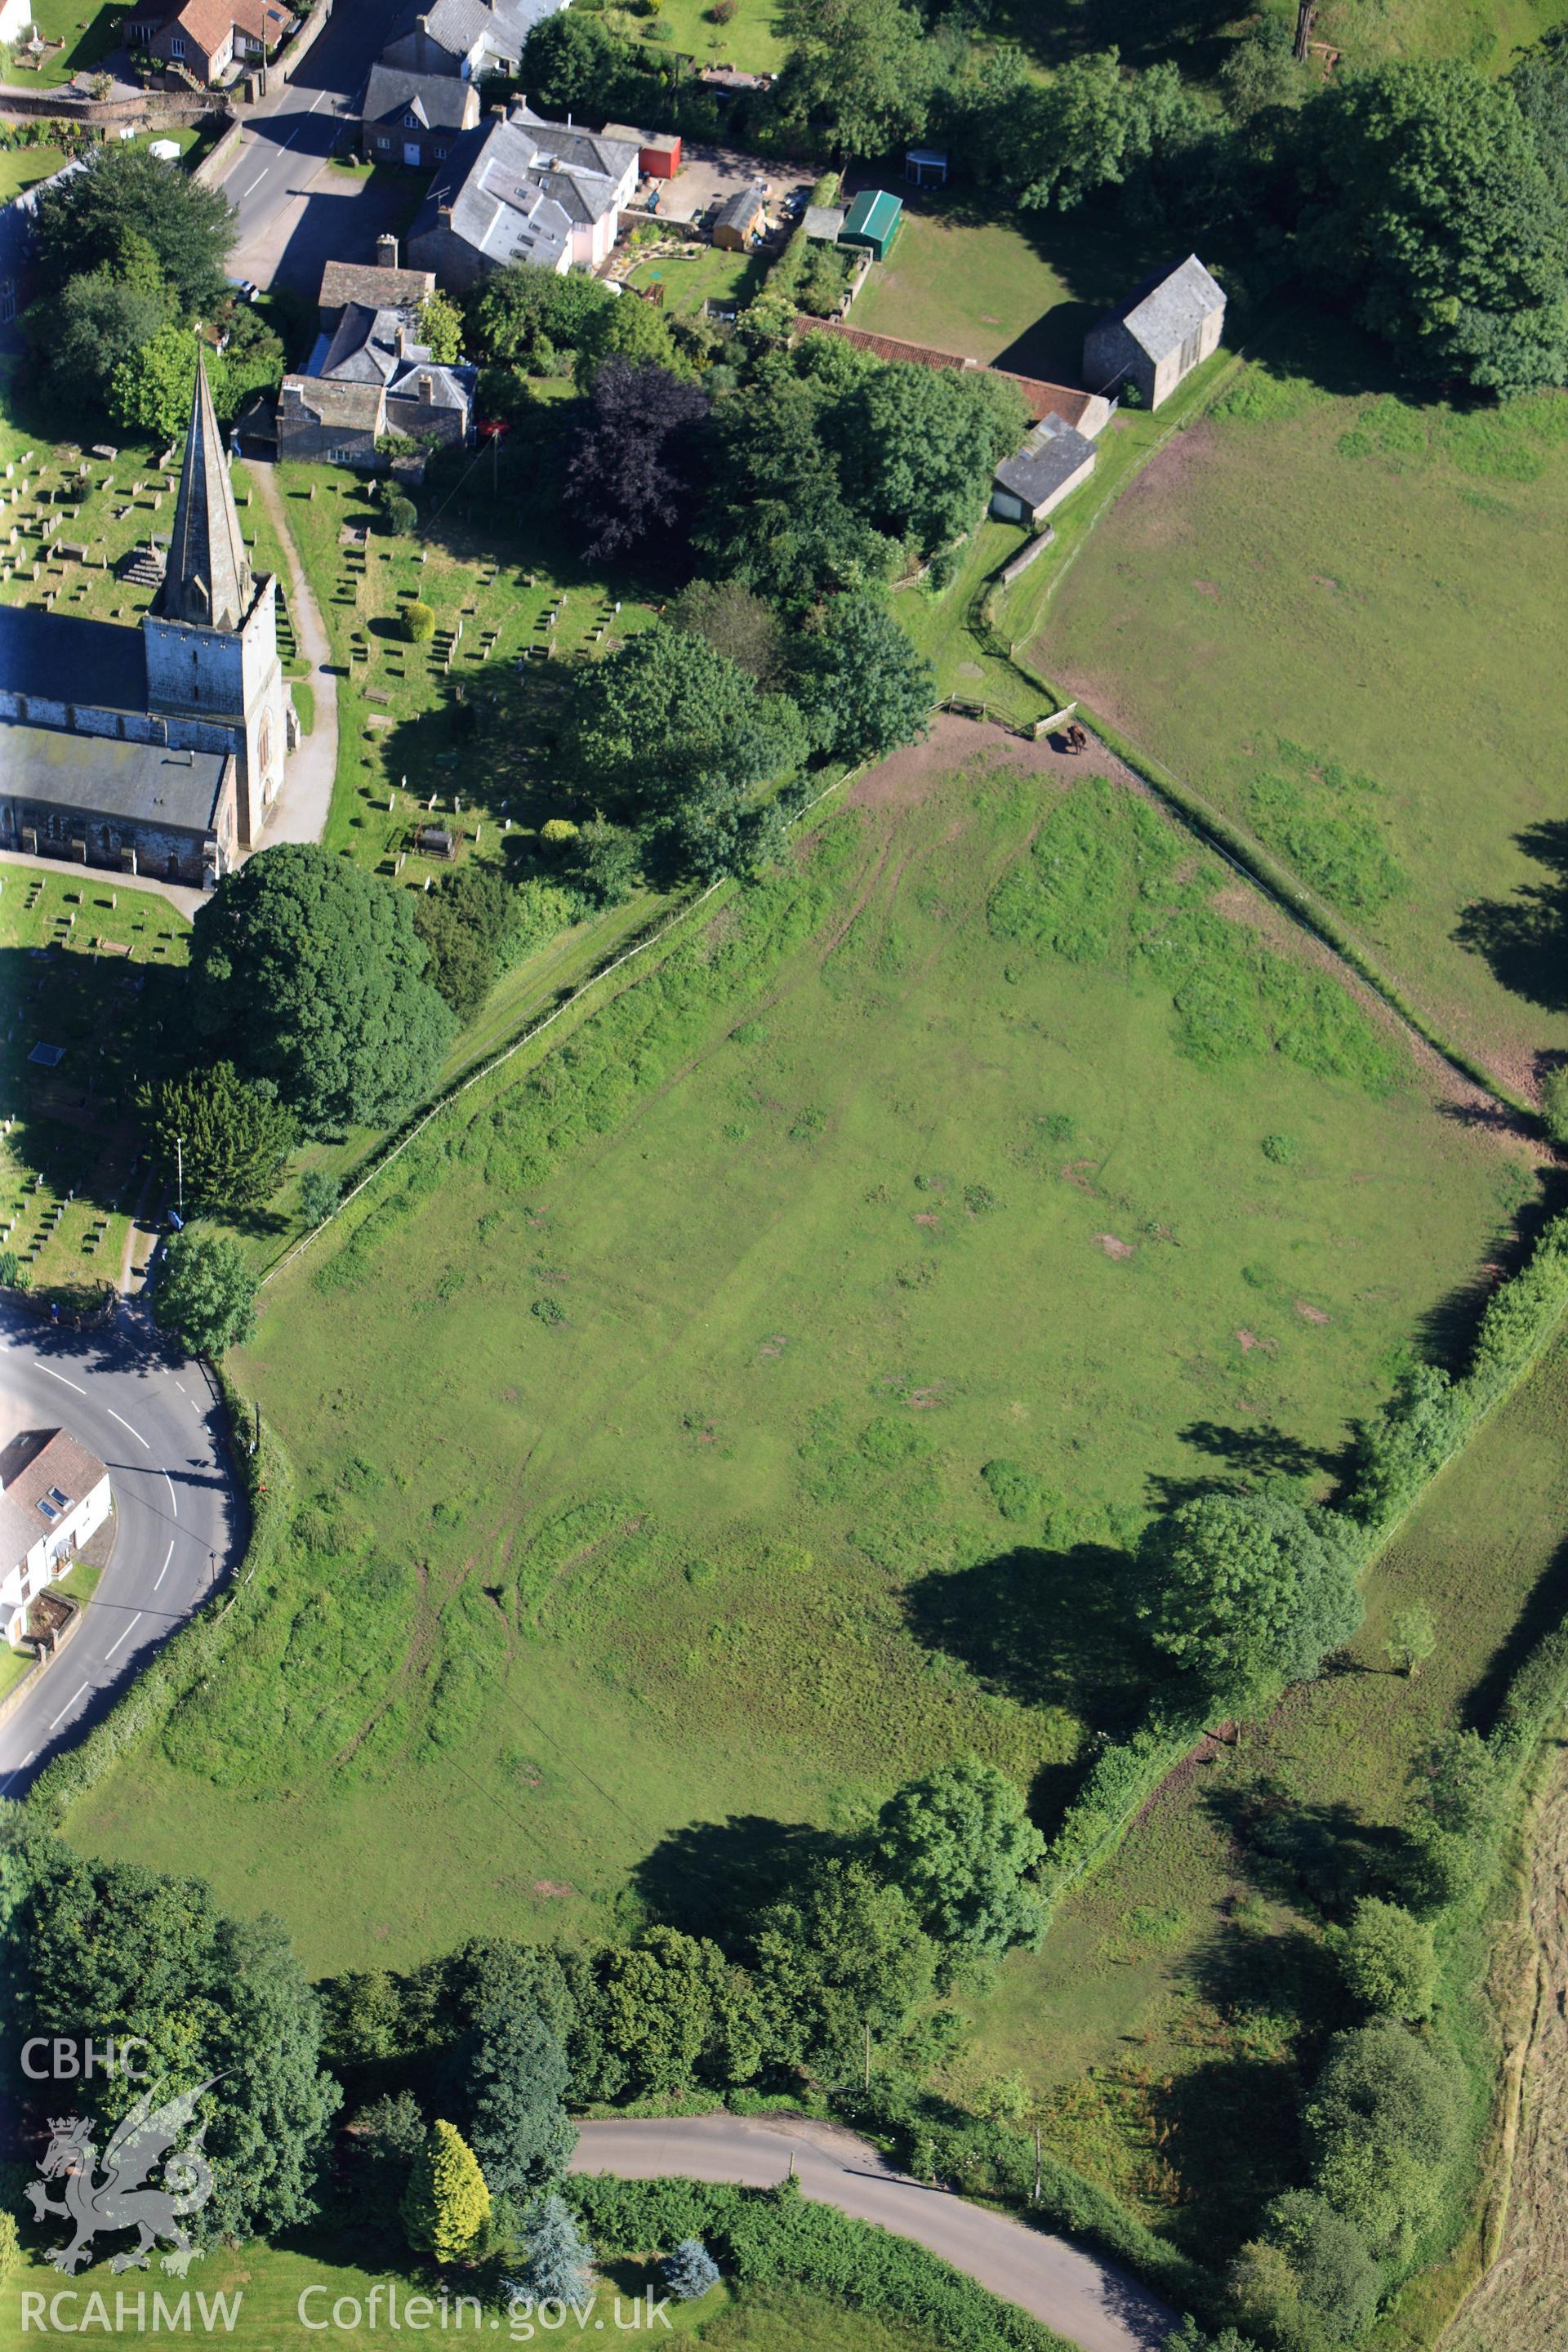 RCAHMW colour oblique photograph of Medieval house sites west of Trellech Church. Taken by Toby Driver on 24/07/2012.